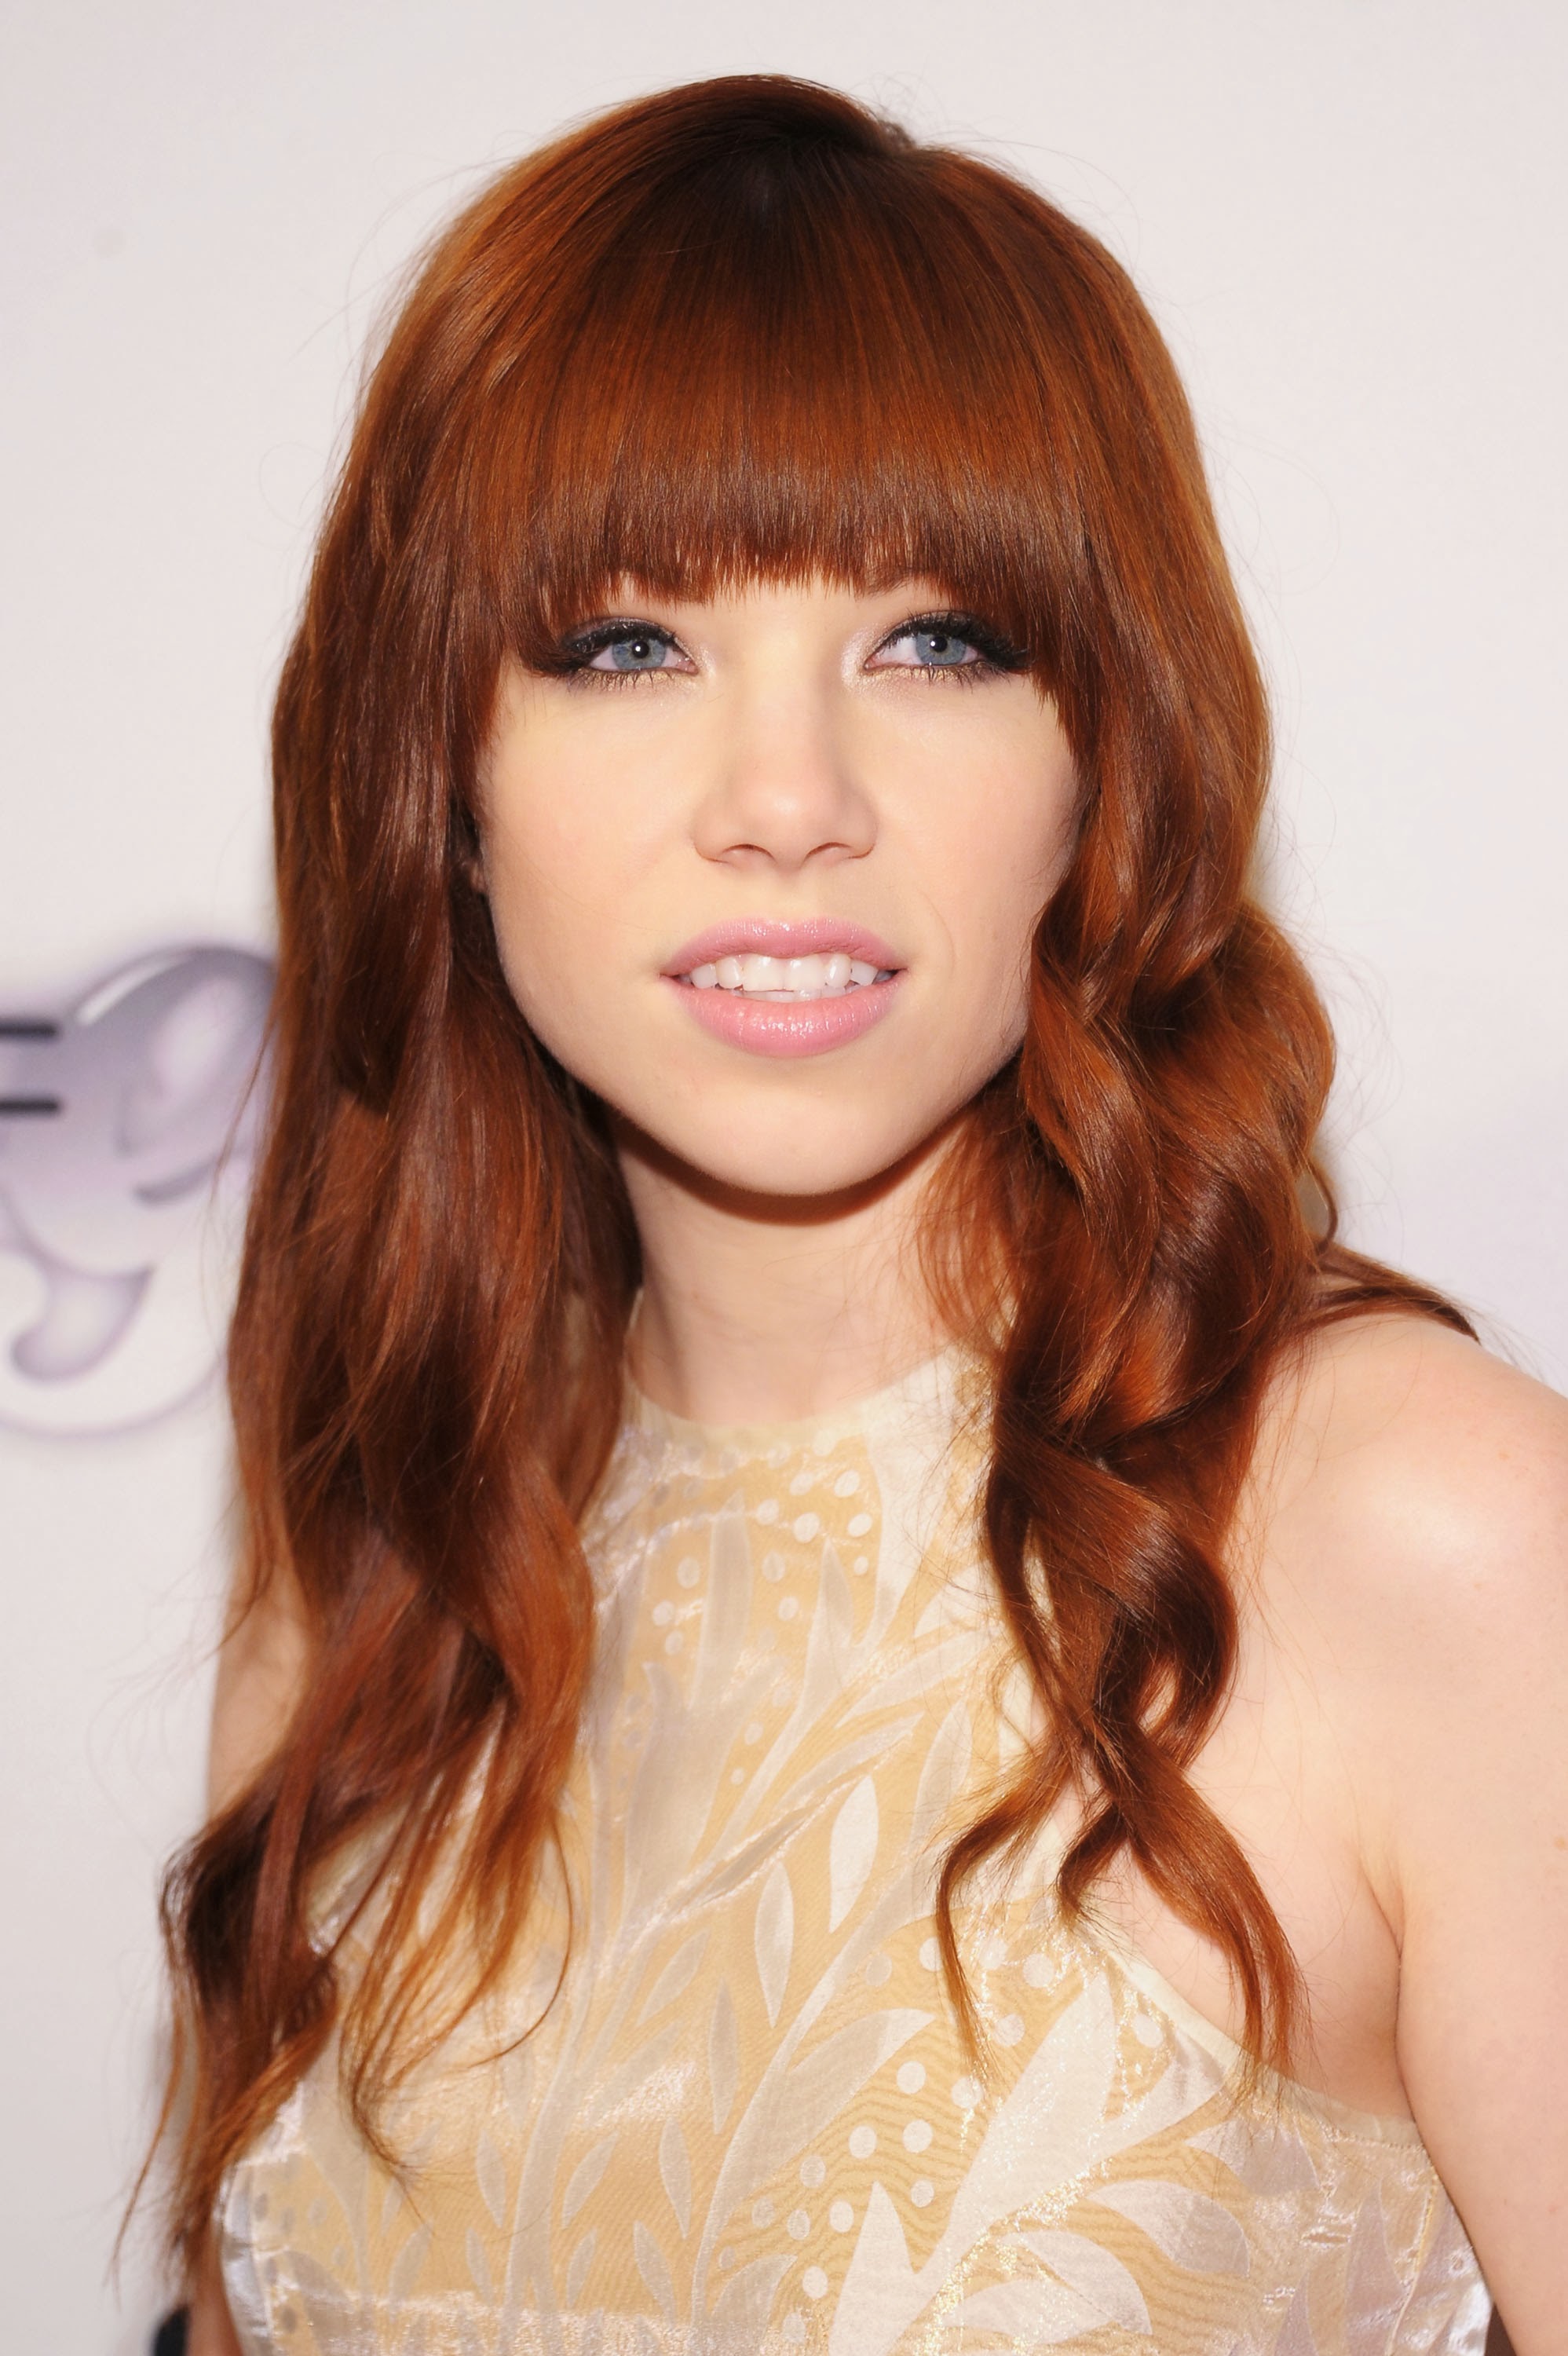 Picture Of Carly Rae Jepsen In General Pictures Carly Rae Jepsen 1448850776 Teen Idols 4 You